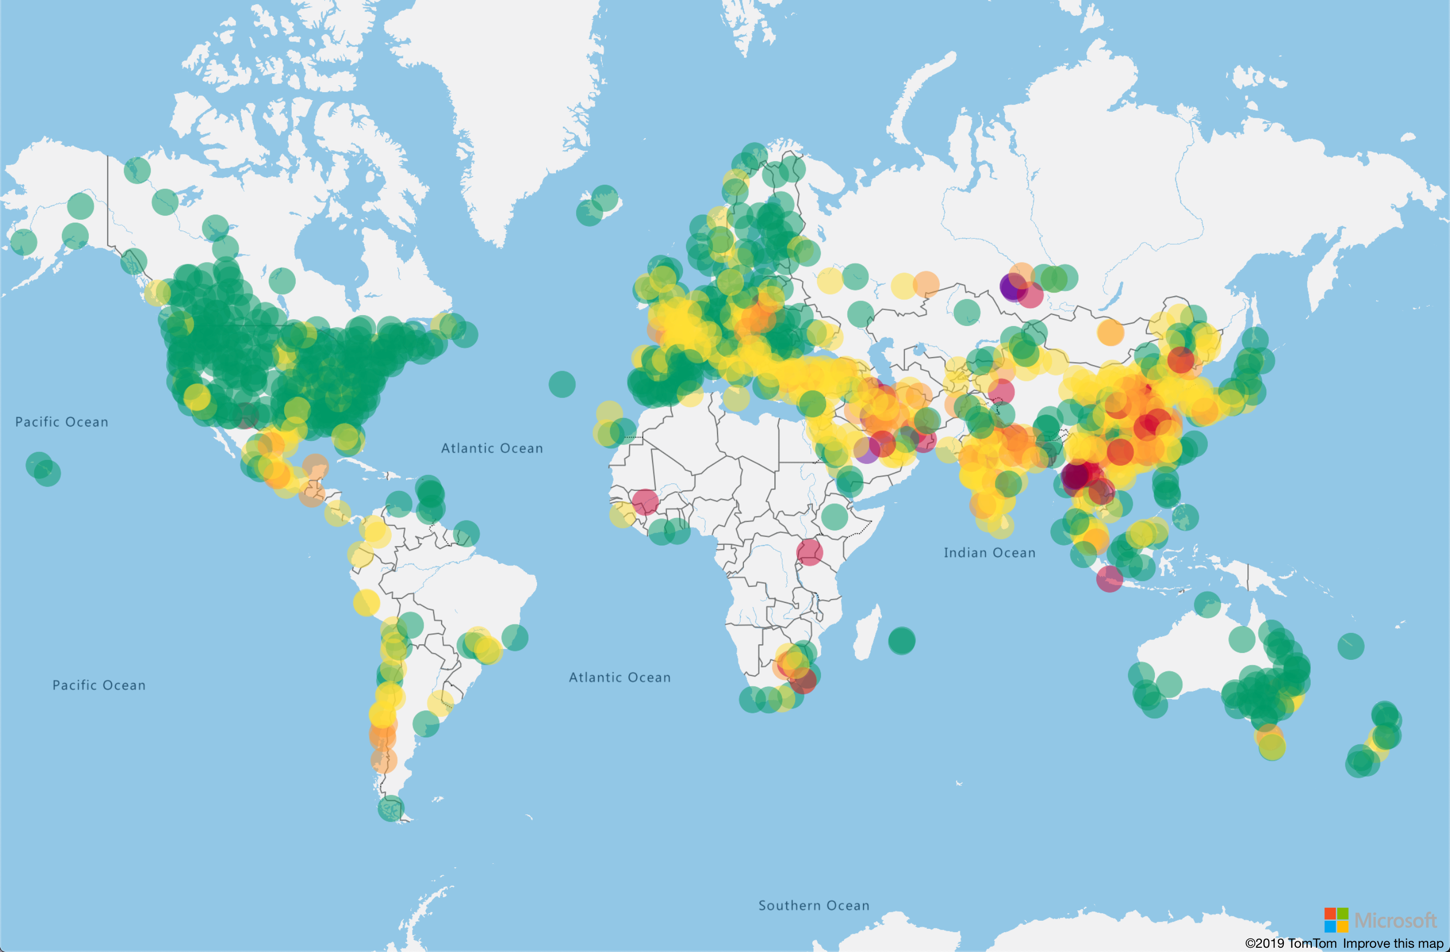 Image of a map of the world that shows pollution data as colored circles.